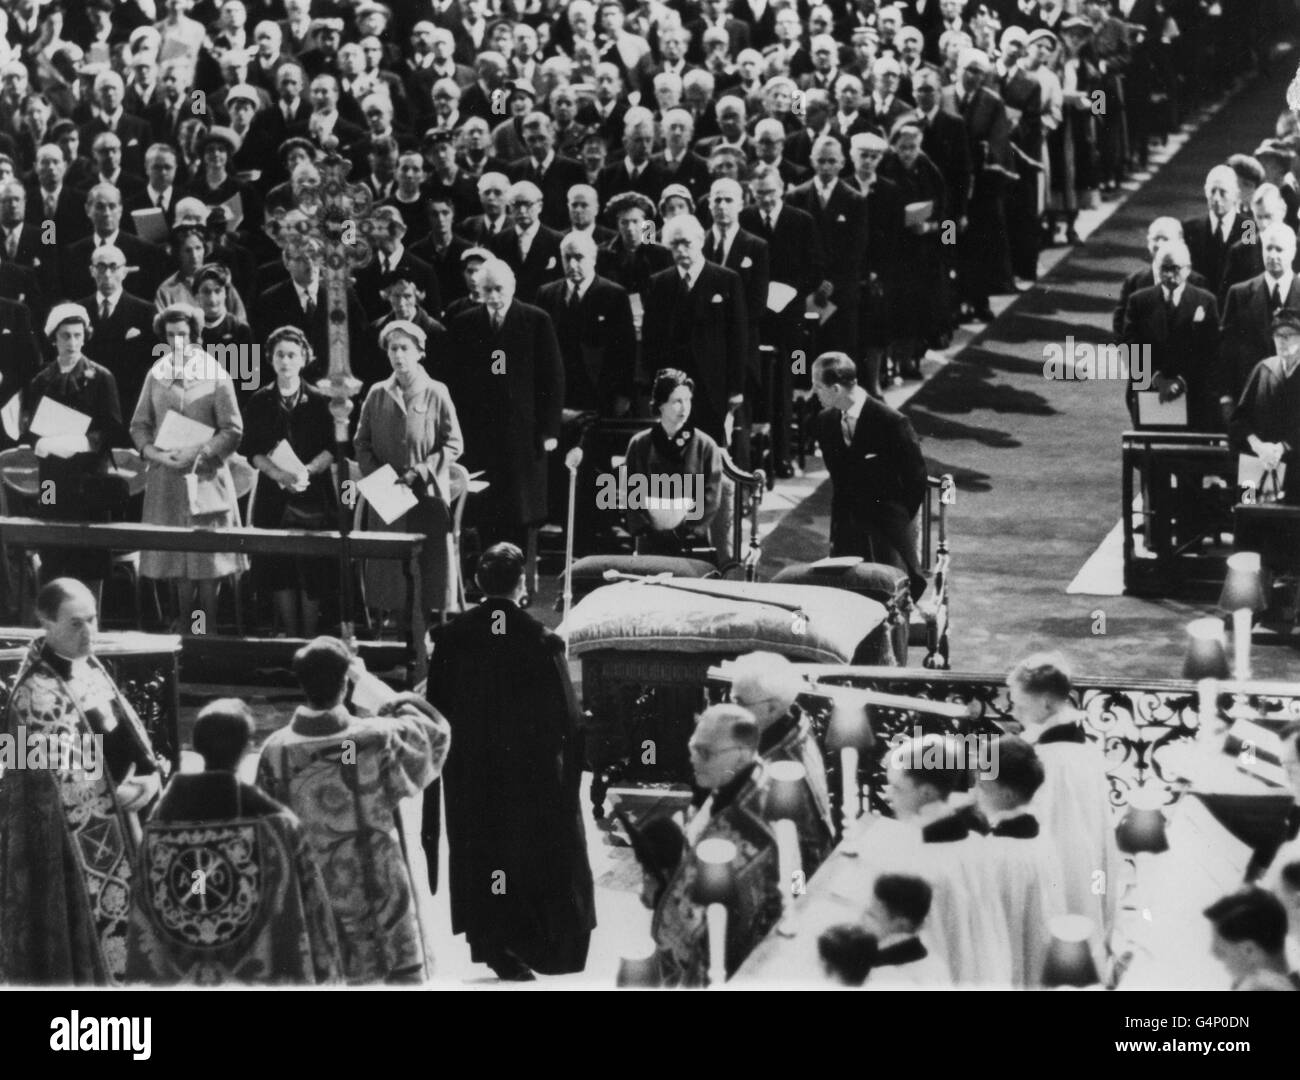 Queen Elizabeth II and the Duke of Edinburgh at St. Paul's Cathedral attending the rededication of the High Altar, which was damaged in London's wartime bombing. Stock Photo